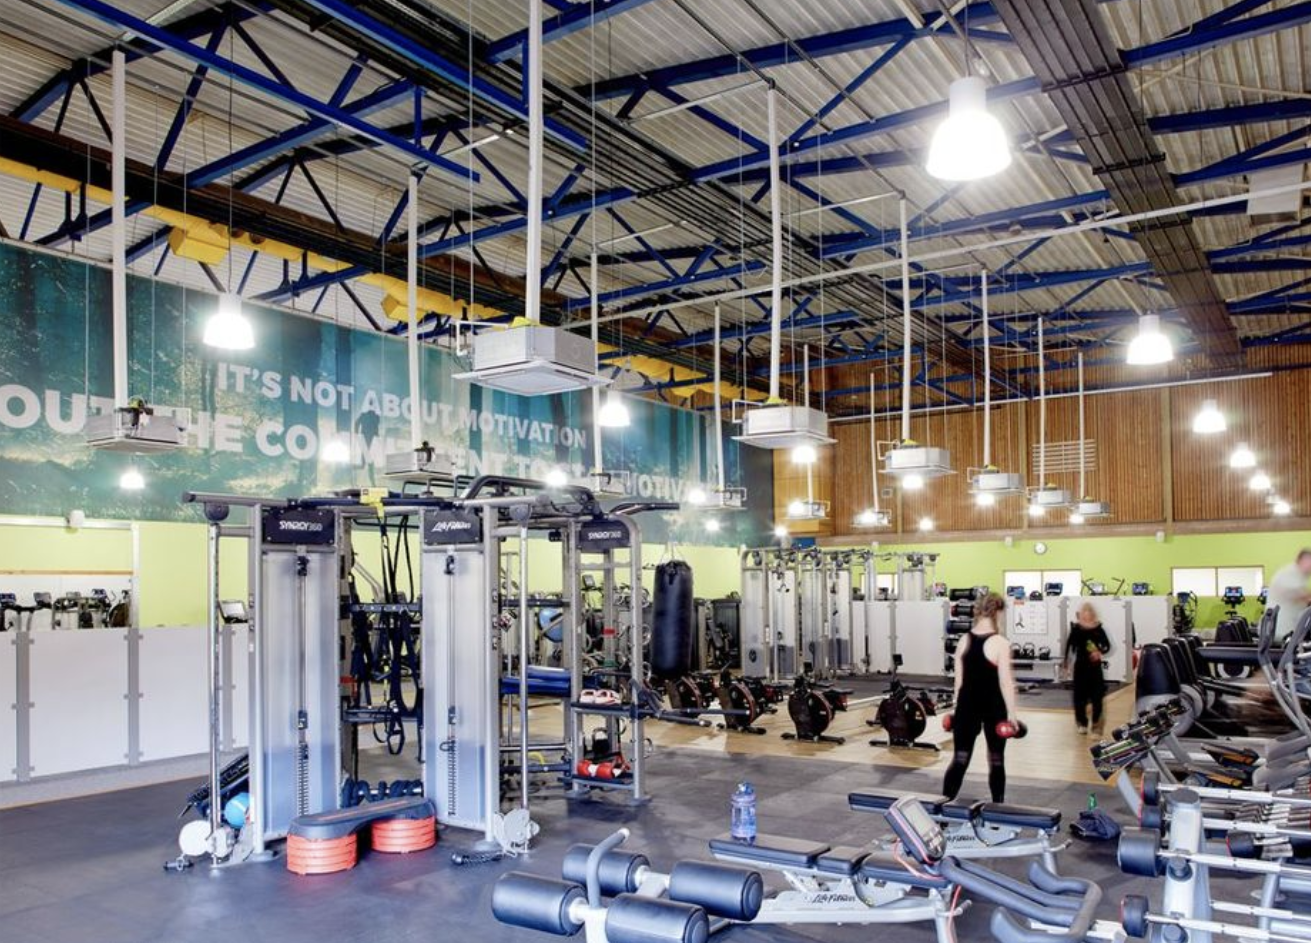 Leisure Centre gym in Solihull on Hussle, Cocks Moors Woods Leisure Centre